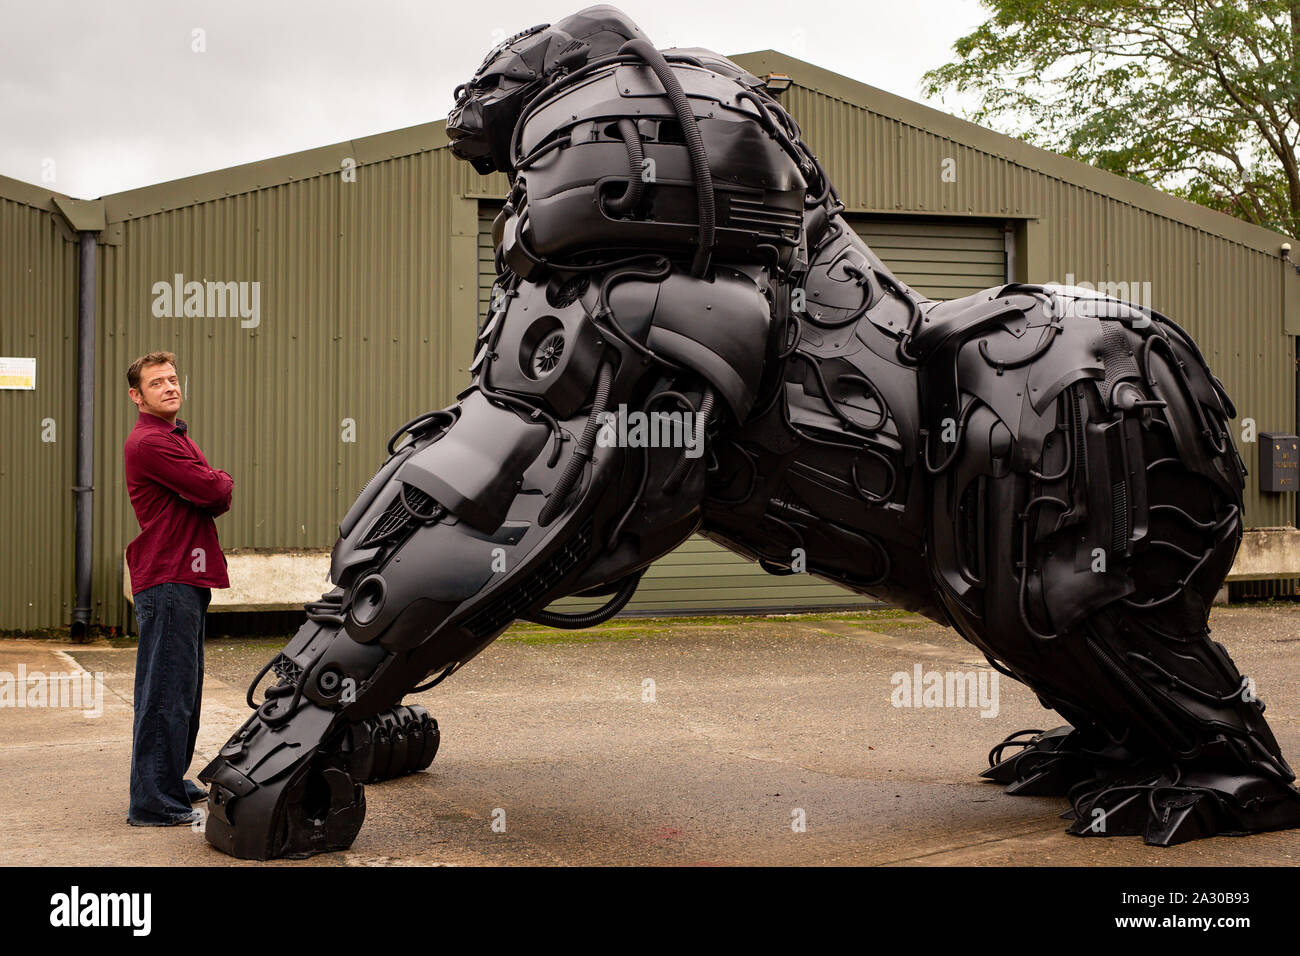 Sculptor Luke Kite with his 12ft sculpture of a gorilla, entitled 'Gorilla Apocalypse', created entirely from scrap car bumpers and panels discarded from only the last decade, on display at the British Ironwork Centre in Oswestry, Shropshire. Stock Photo